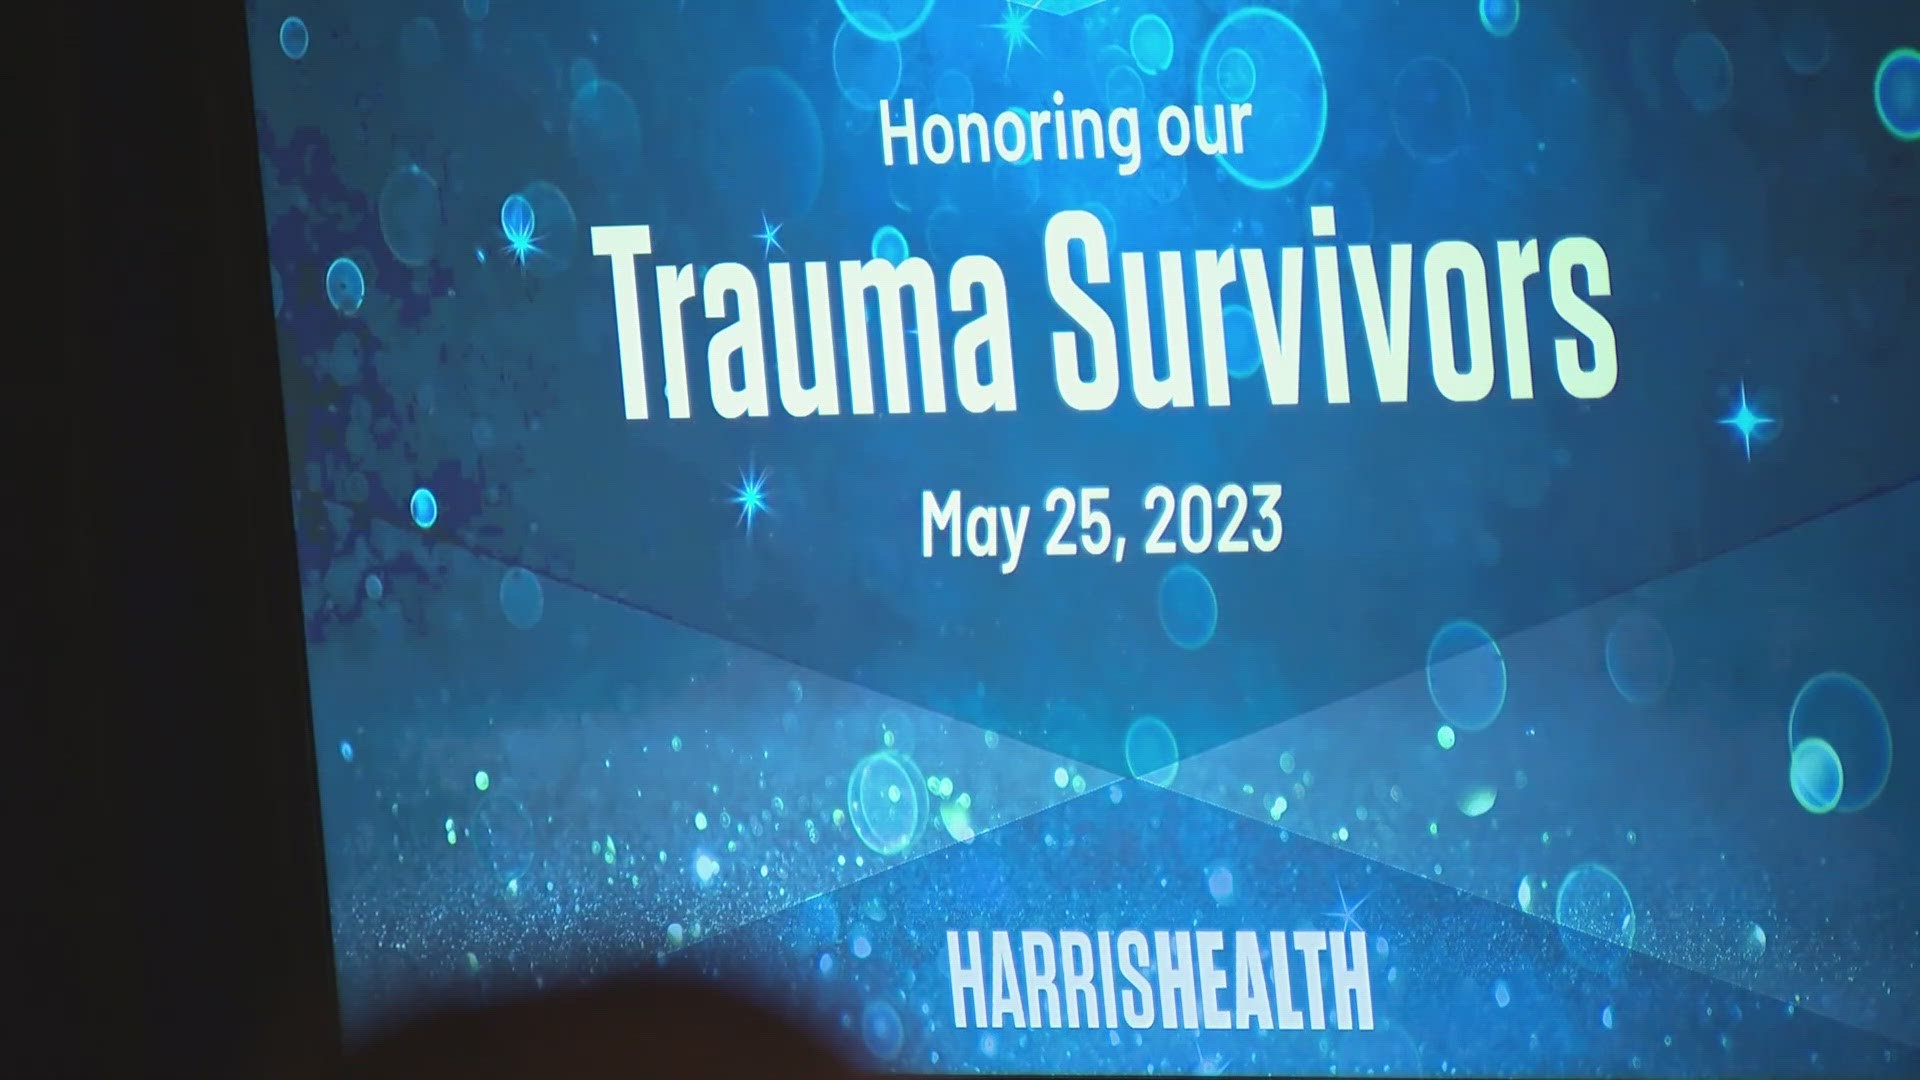 Every year, Harris Health System honors a group of people who lived to tell their incredible stories of survival.